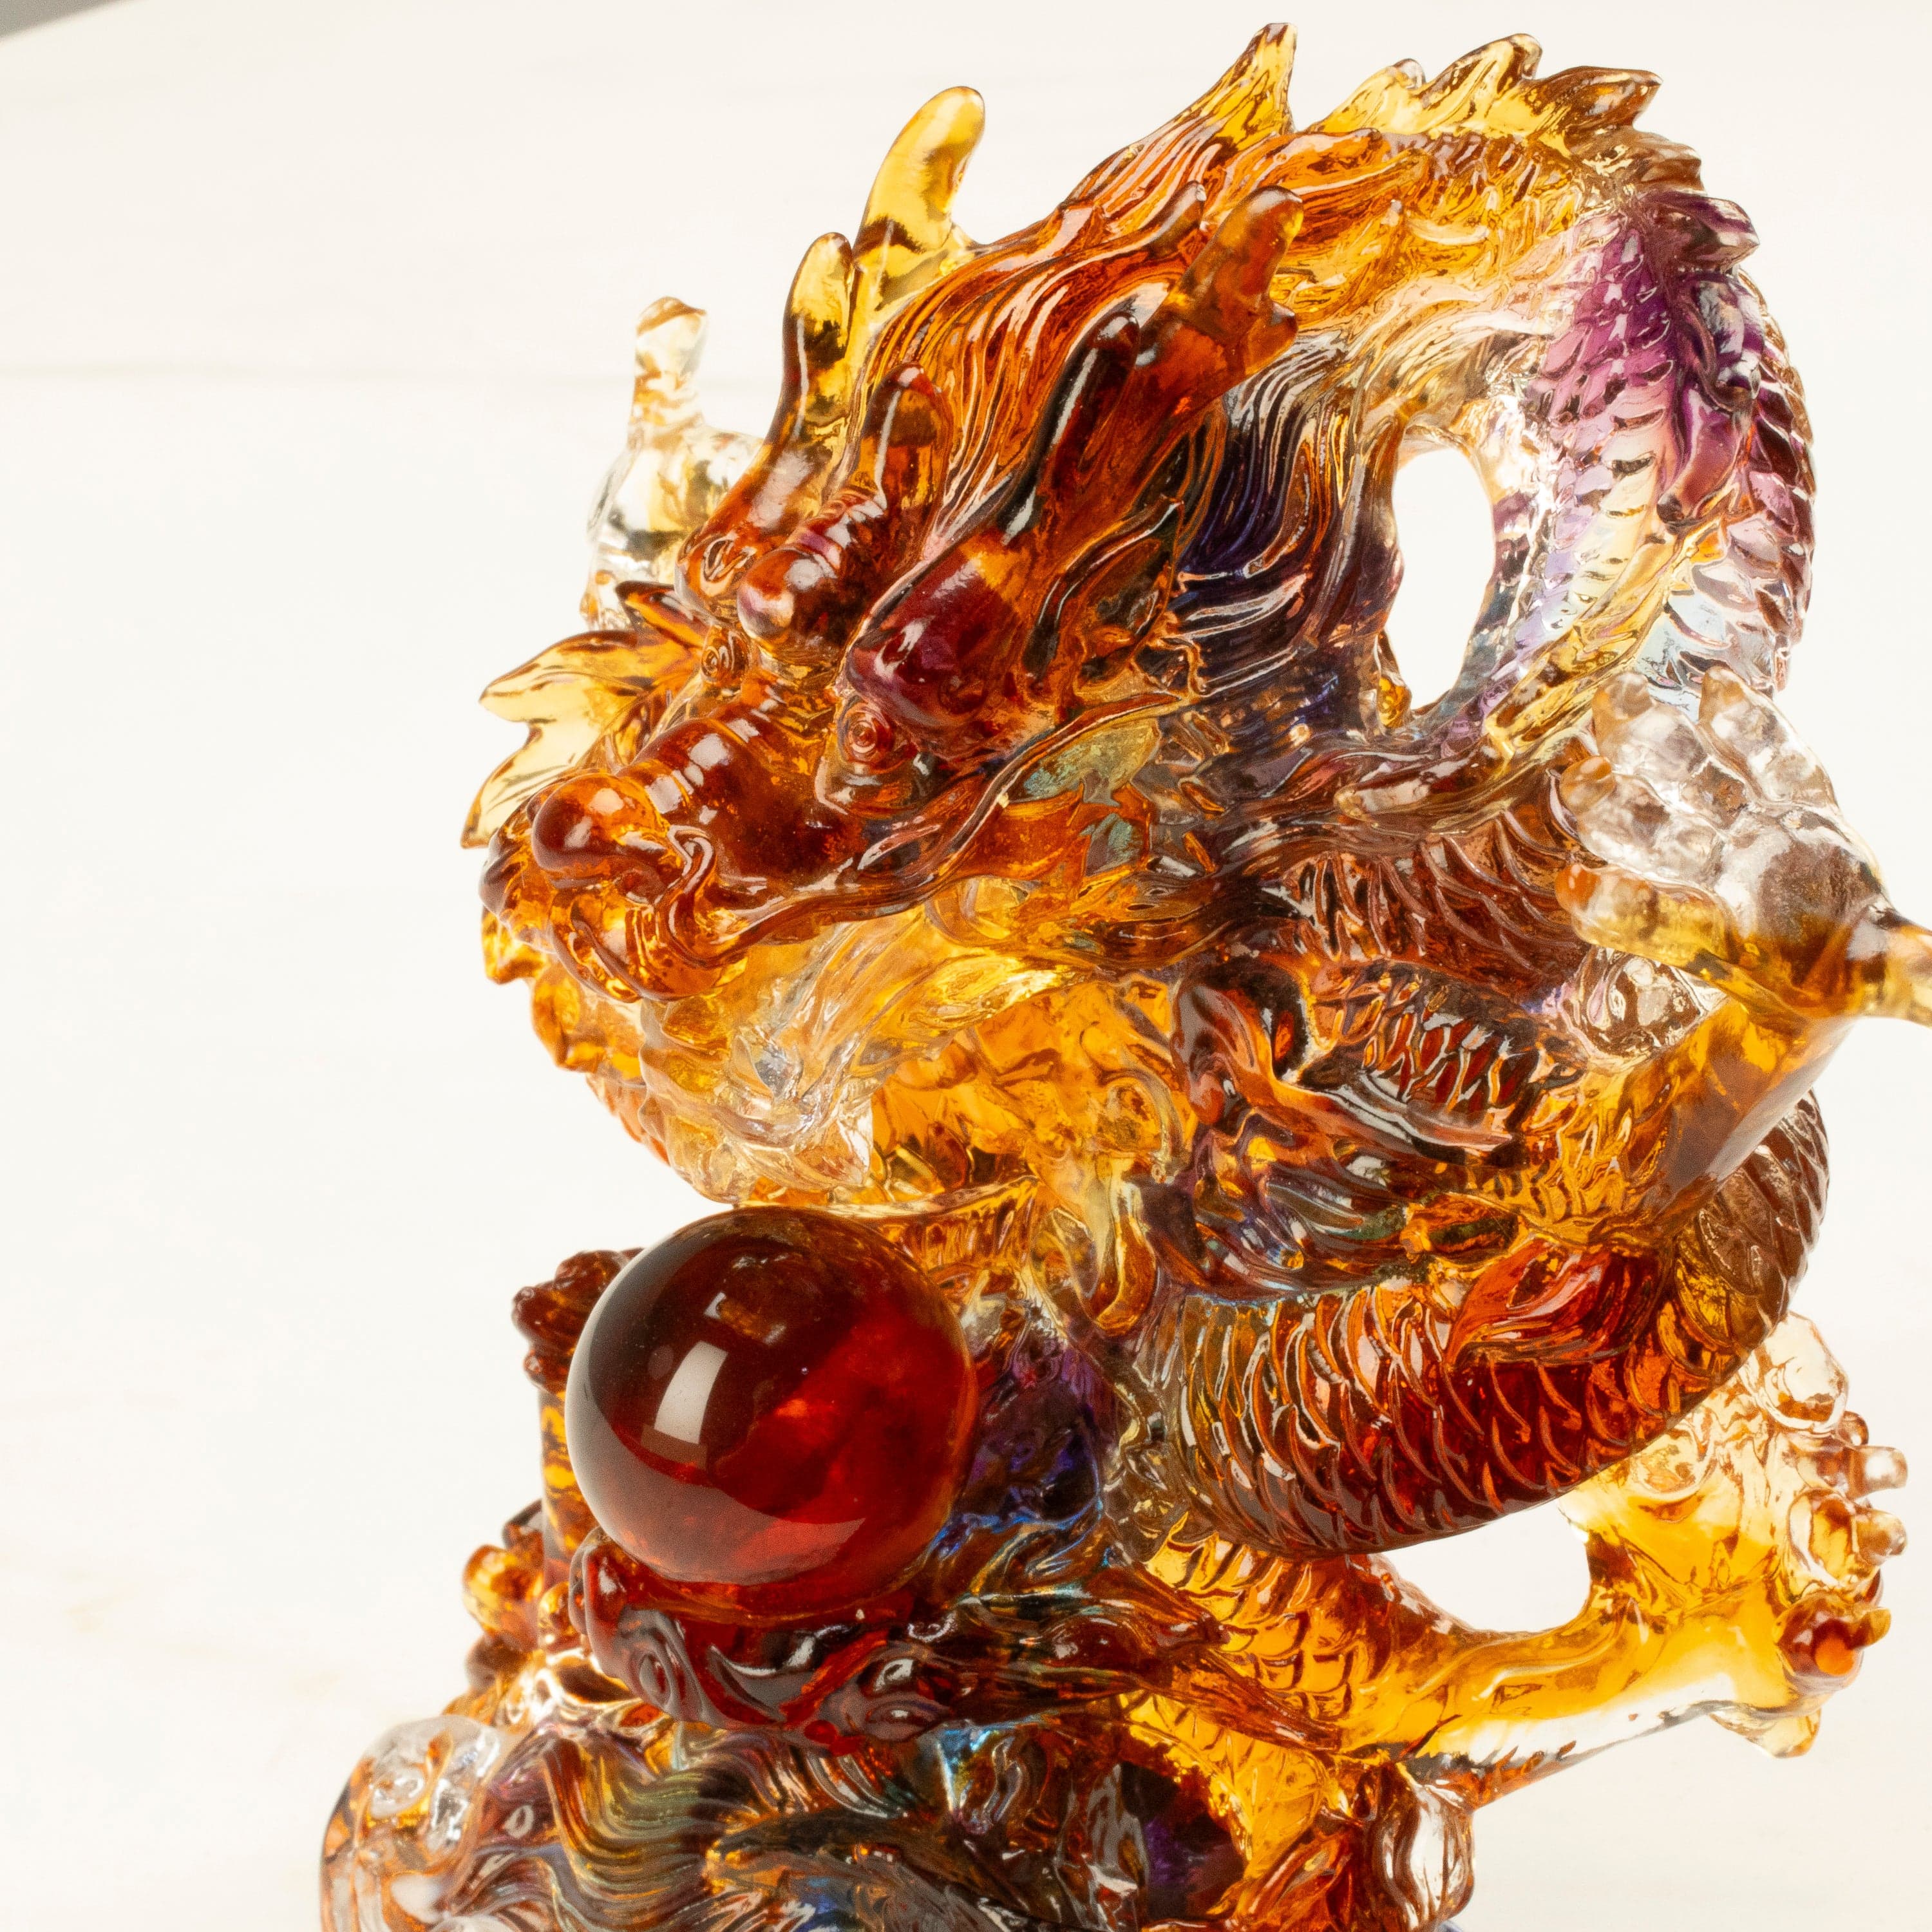 Kalifano Crystal Carving Magnificent Dragon Crystal Carving - A Symbol of Power and Good Fortune CR340-DRA